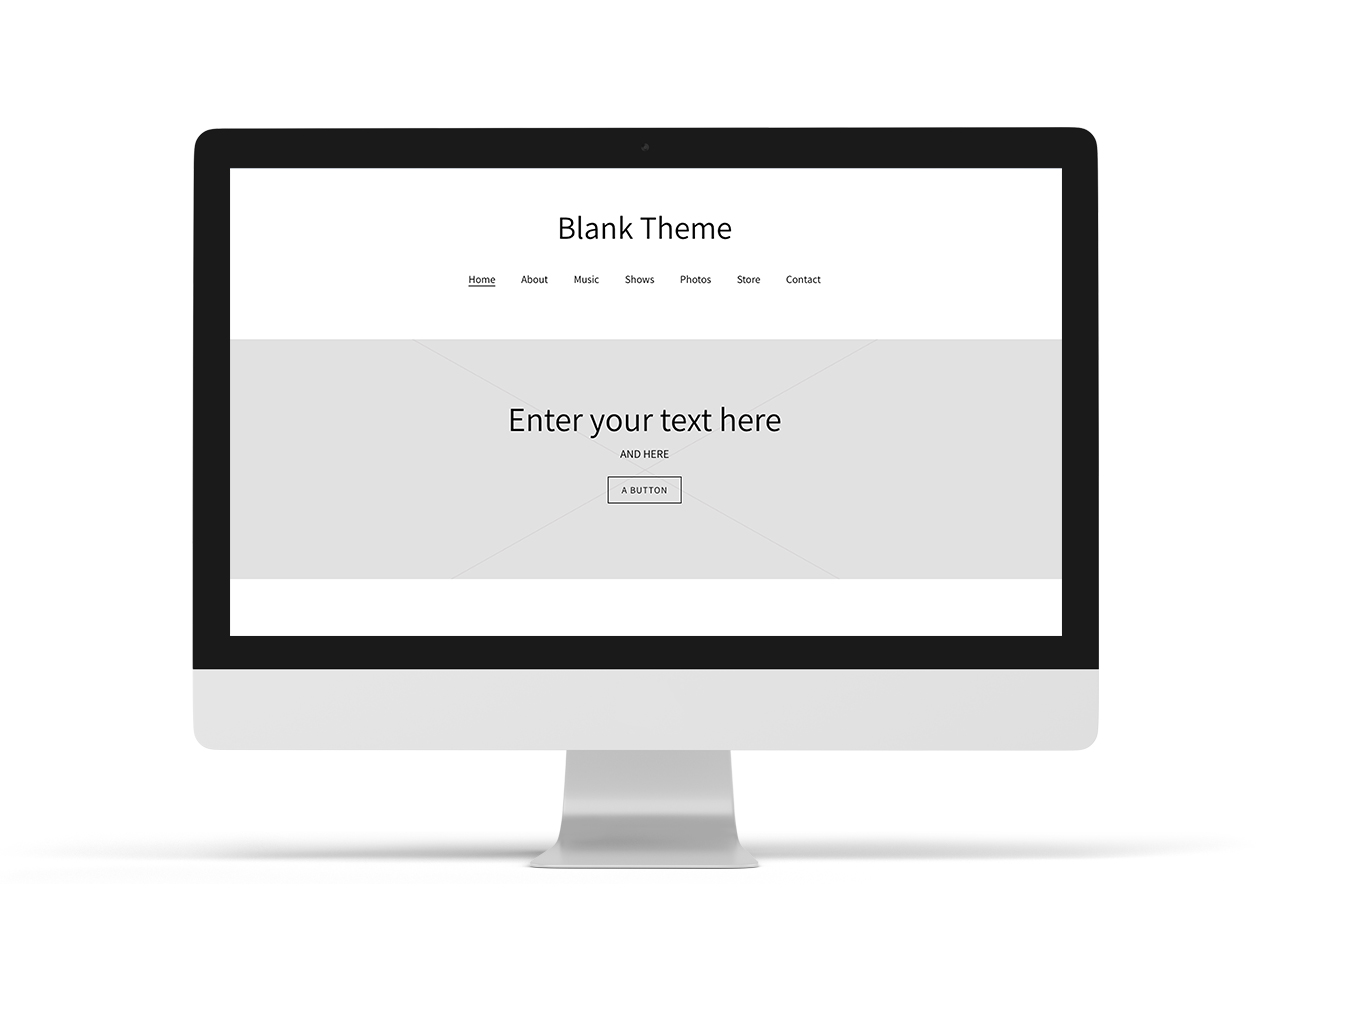 Music website example blank template